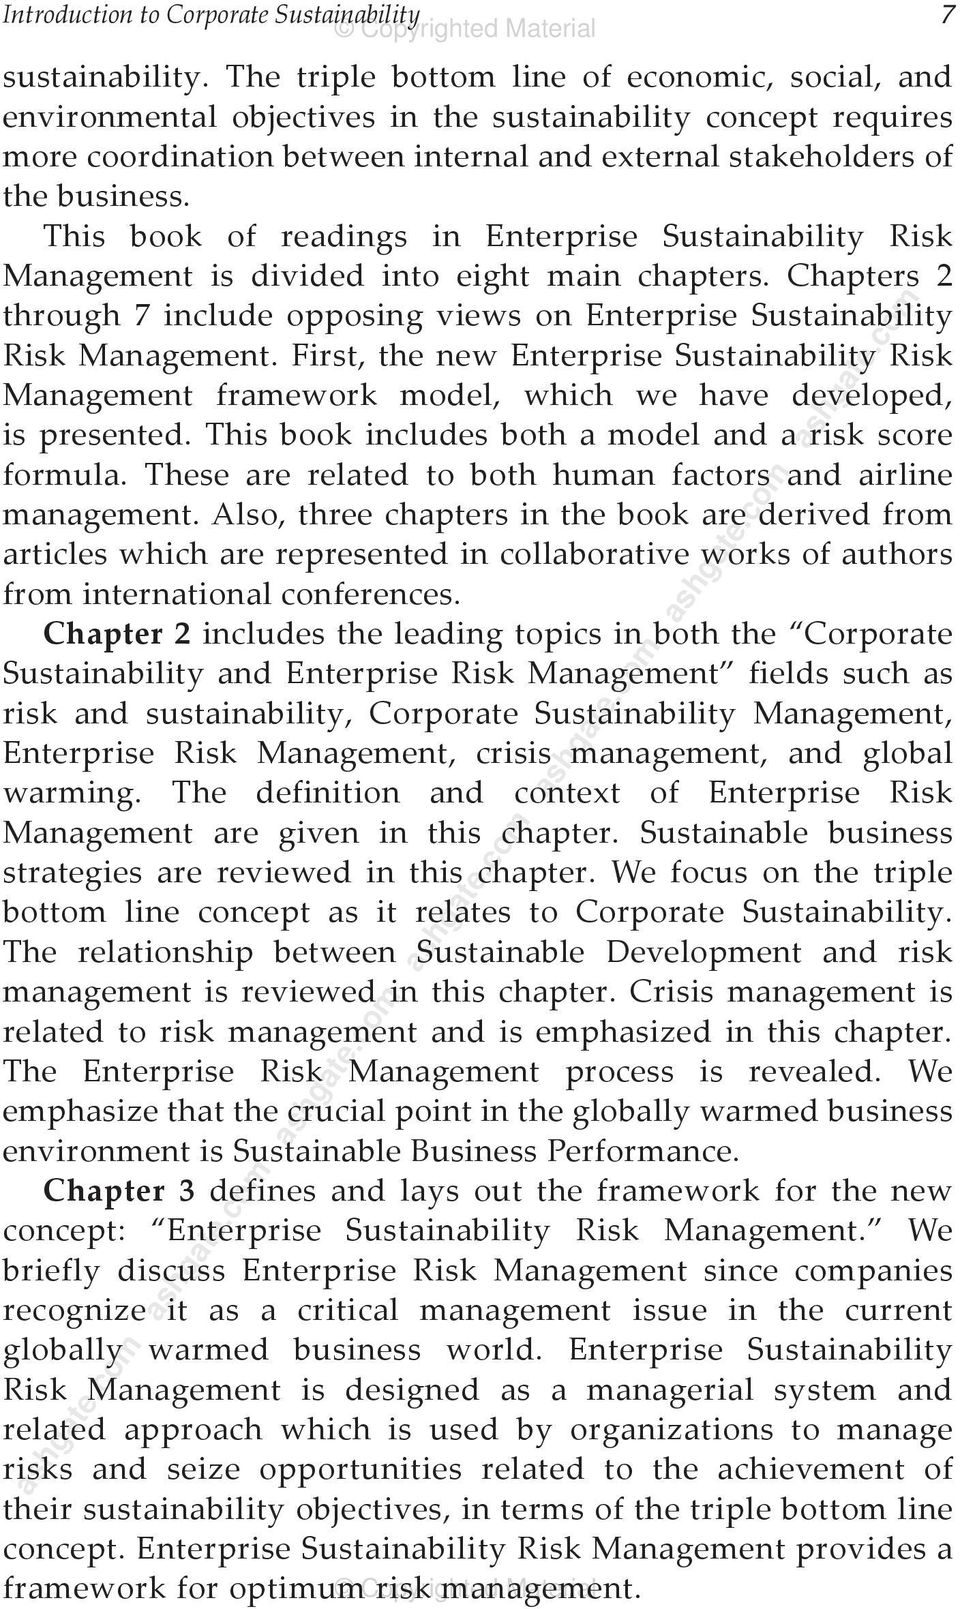 This book of readings in Enterprise Sustainability Risk Management is divided into eight main chapters. Chapters 2 through 7 include opposing views on Enterprise Sustainability Risk Management.